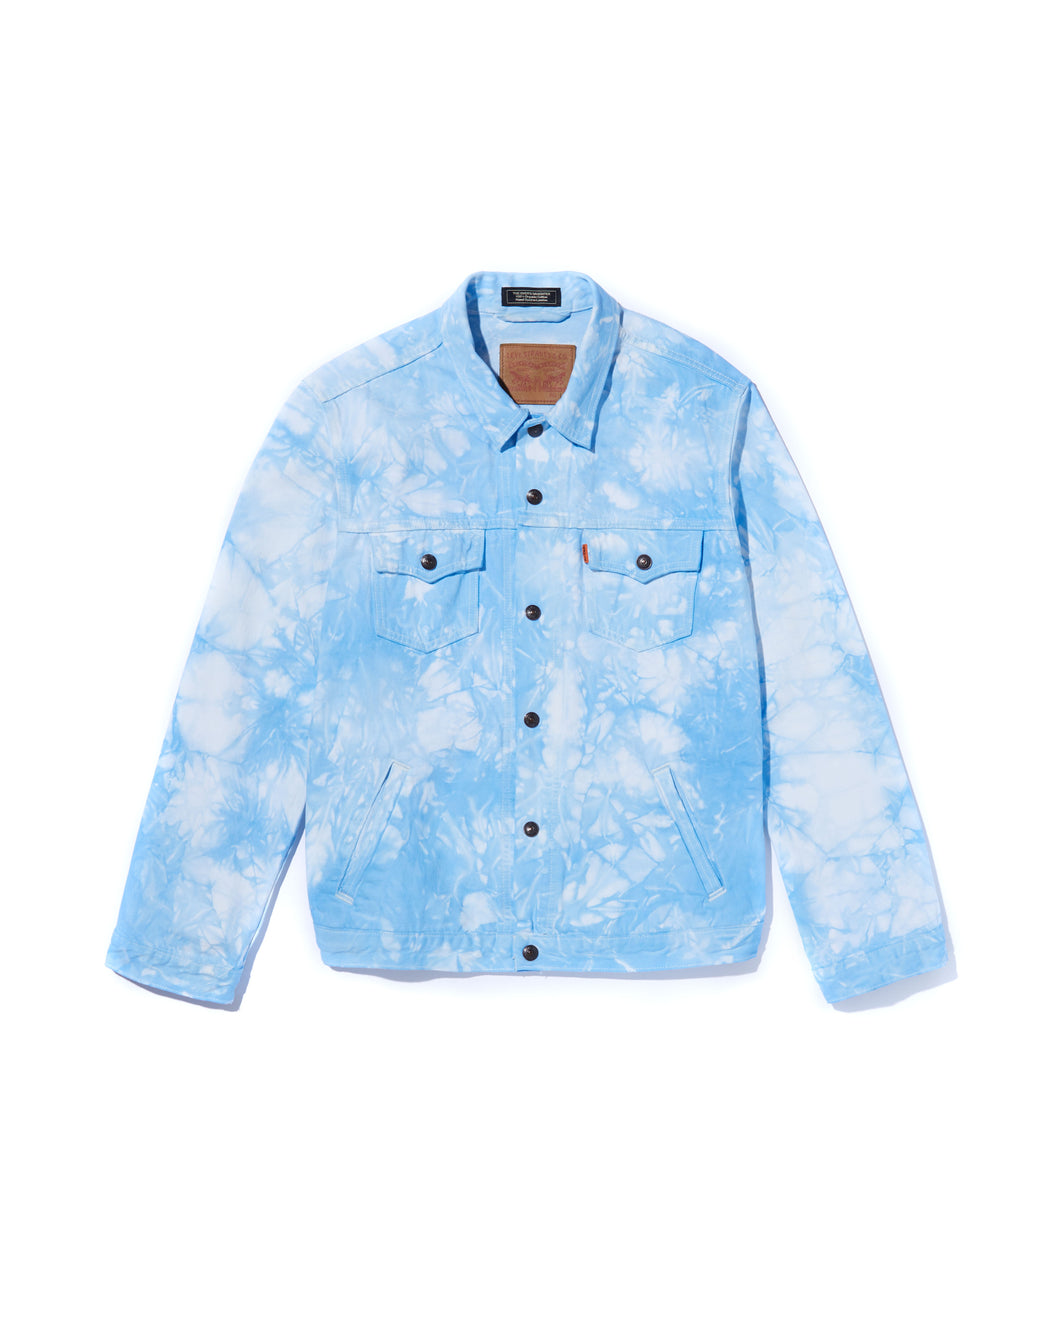 LEVIS x The Dyer’s Daughter Hand-Dyed Denim Jacket in BLUE SKIES